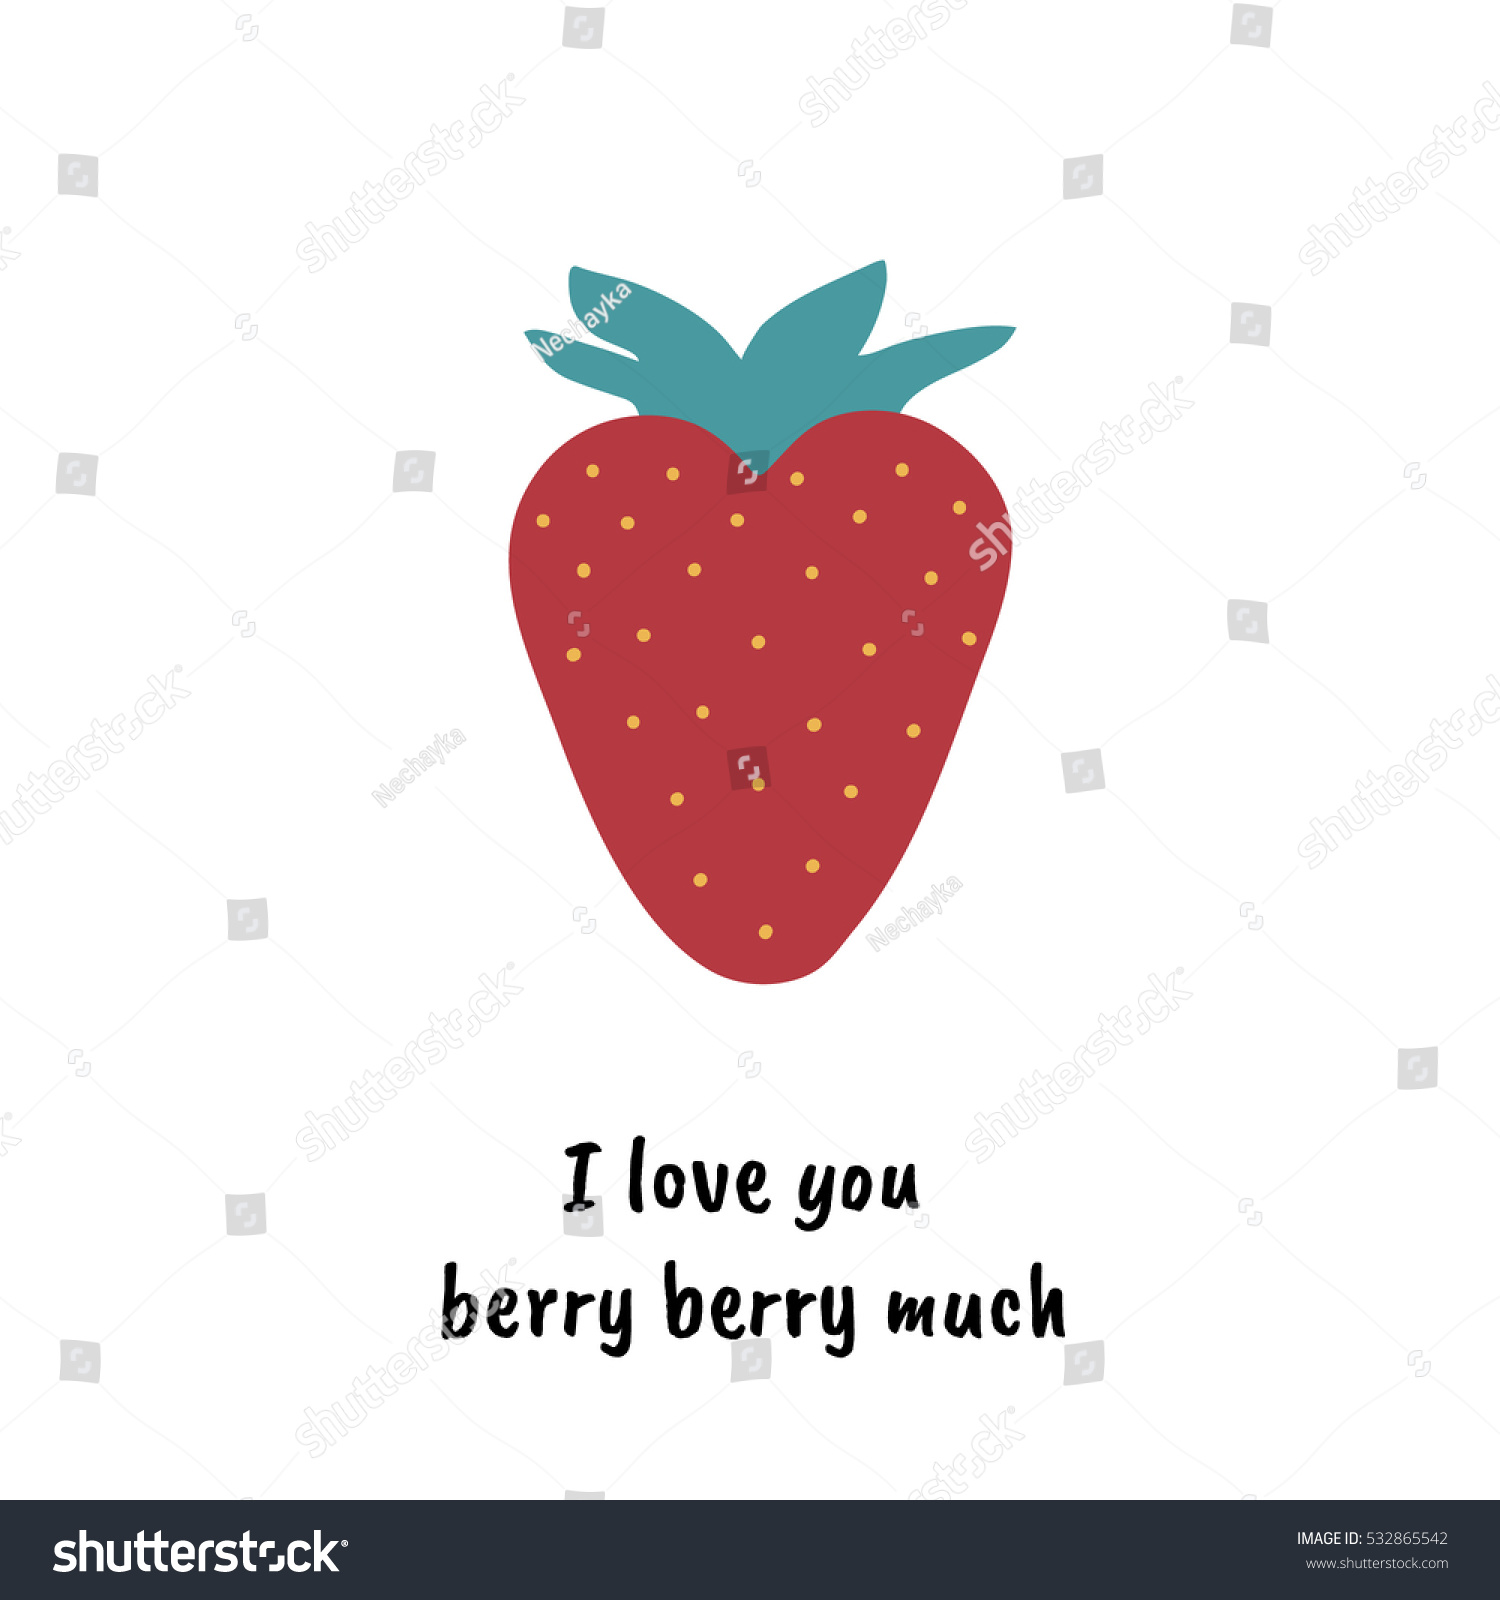 I love you berry much cute quote design t shirt poster